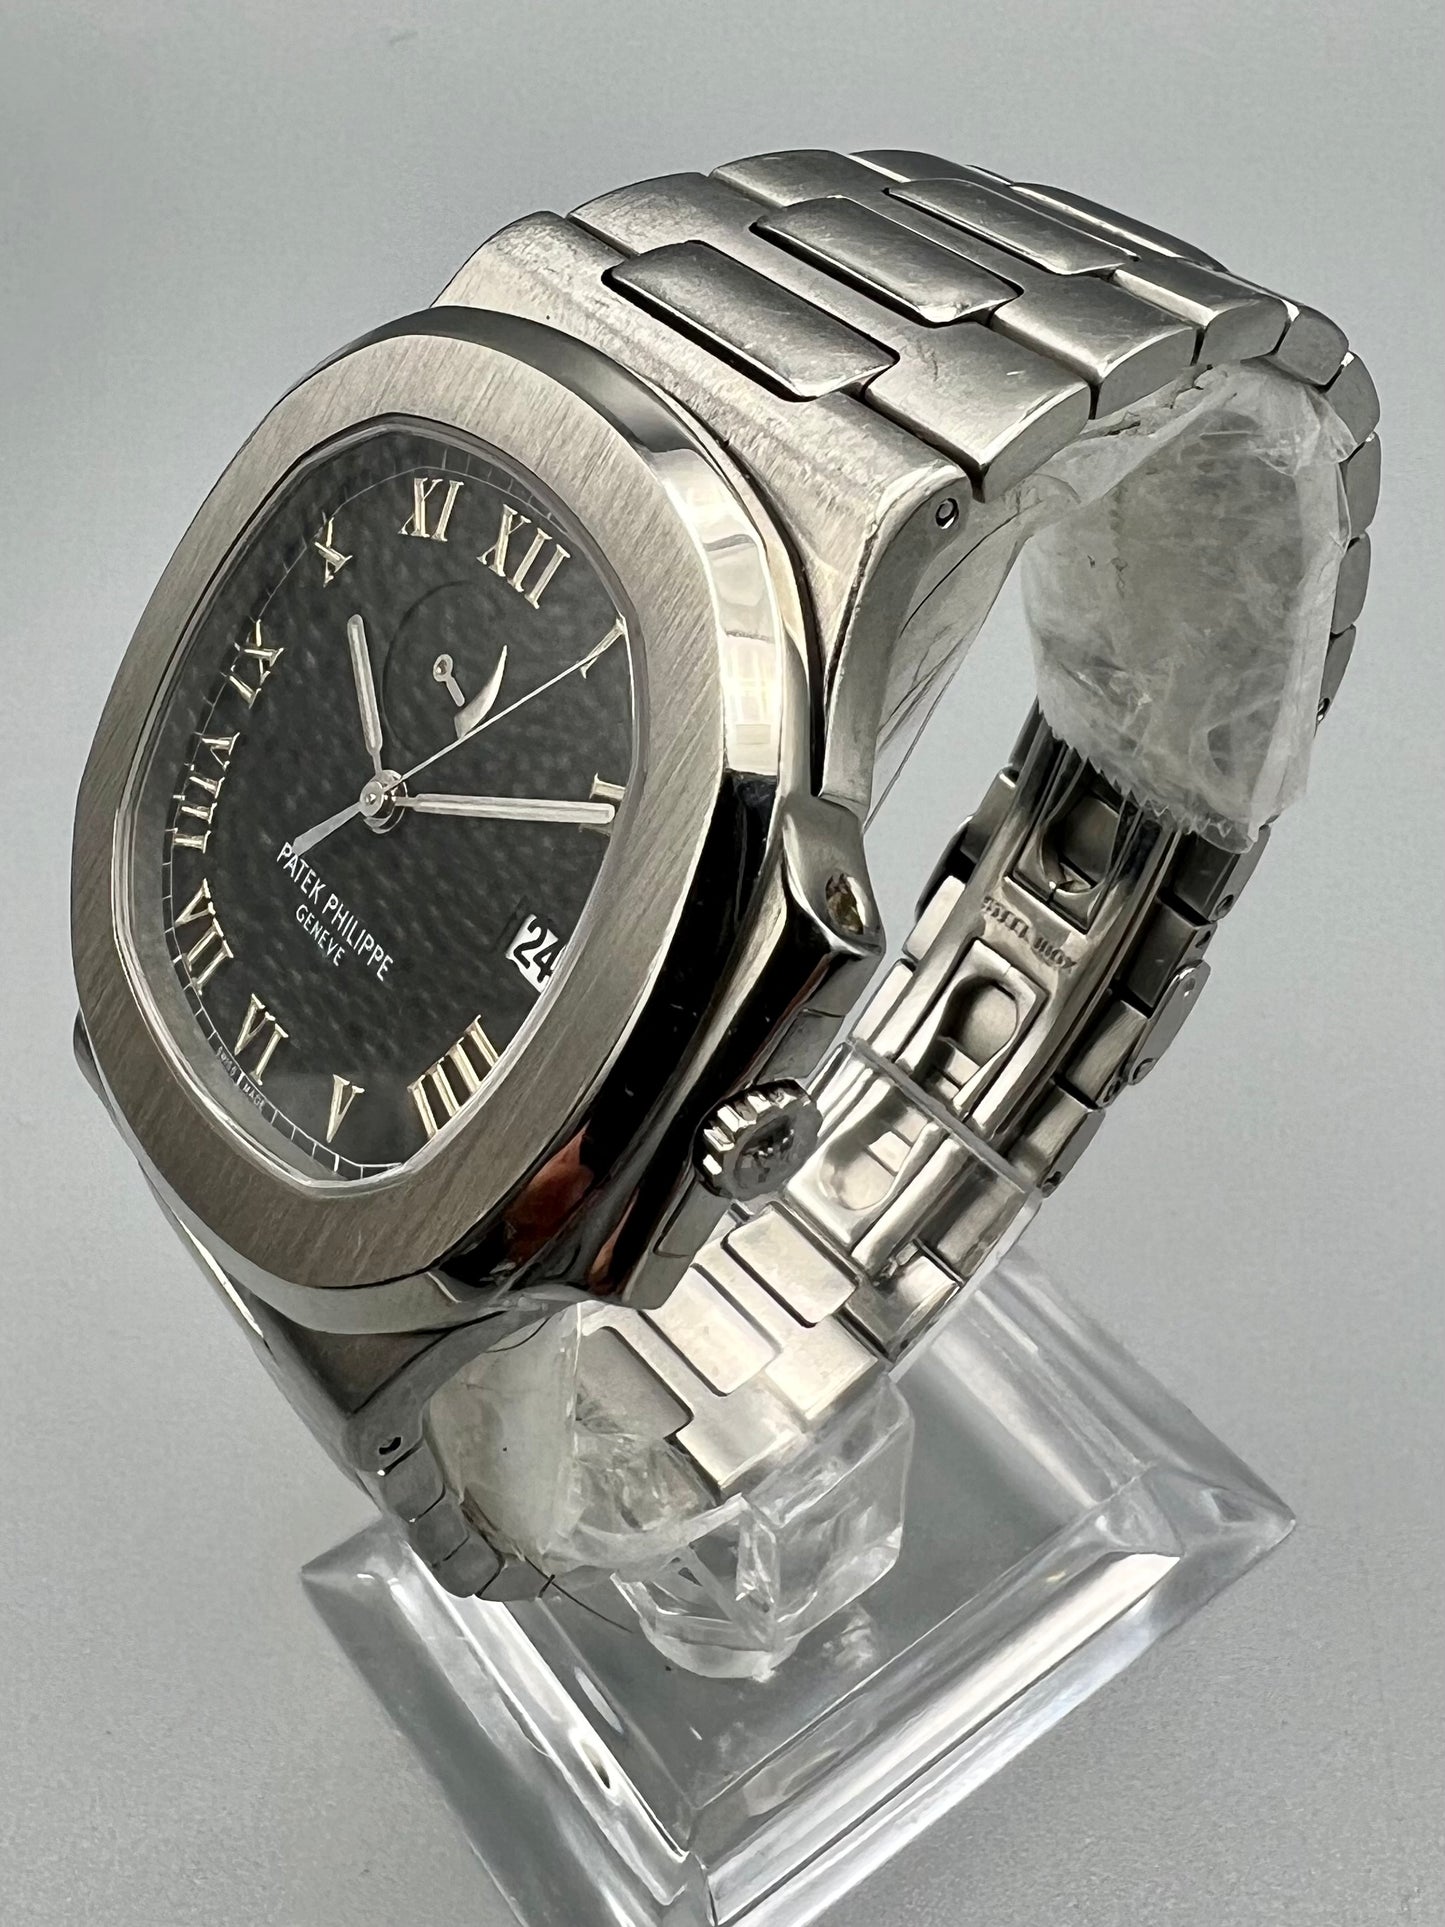 Patek Philippe Ref 3710/1A-001 Nautilus, “The Comet”, Under Service Warranty, Extract from the Archives, Circa 1998